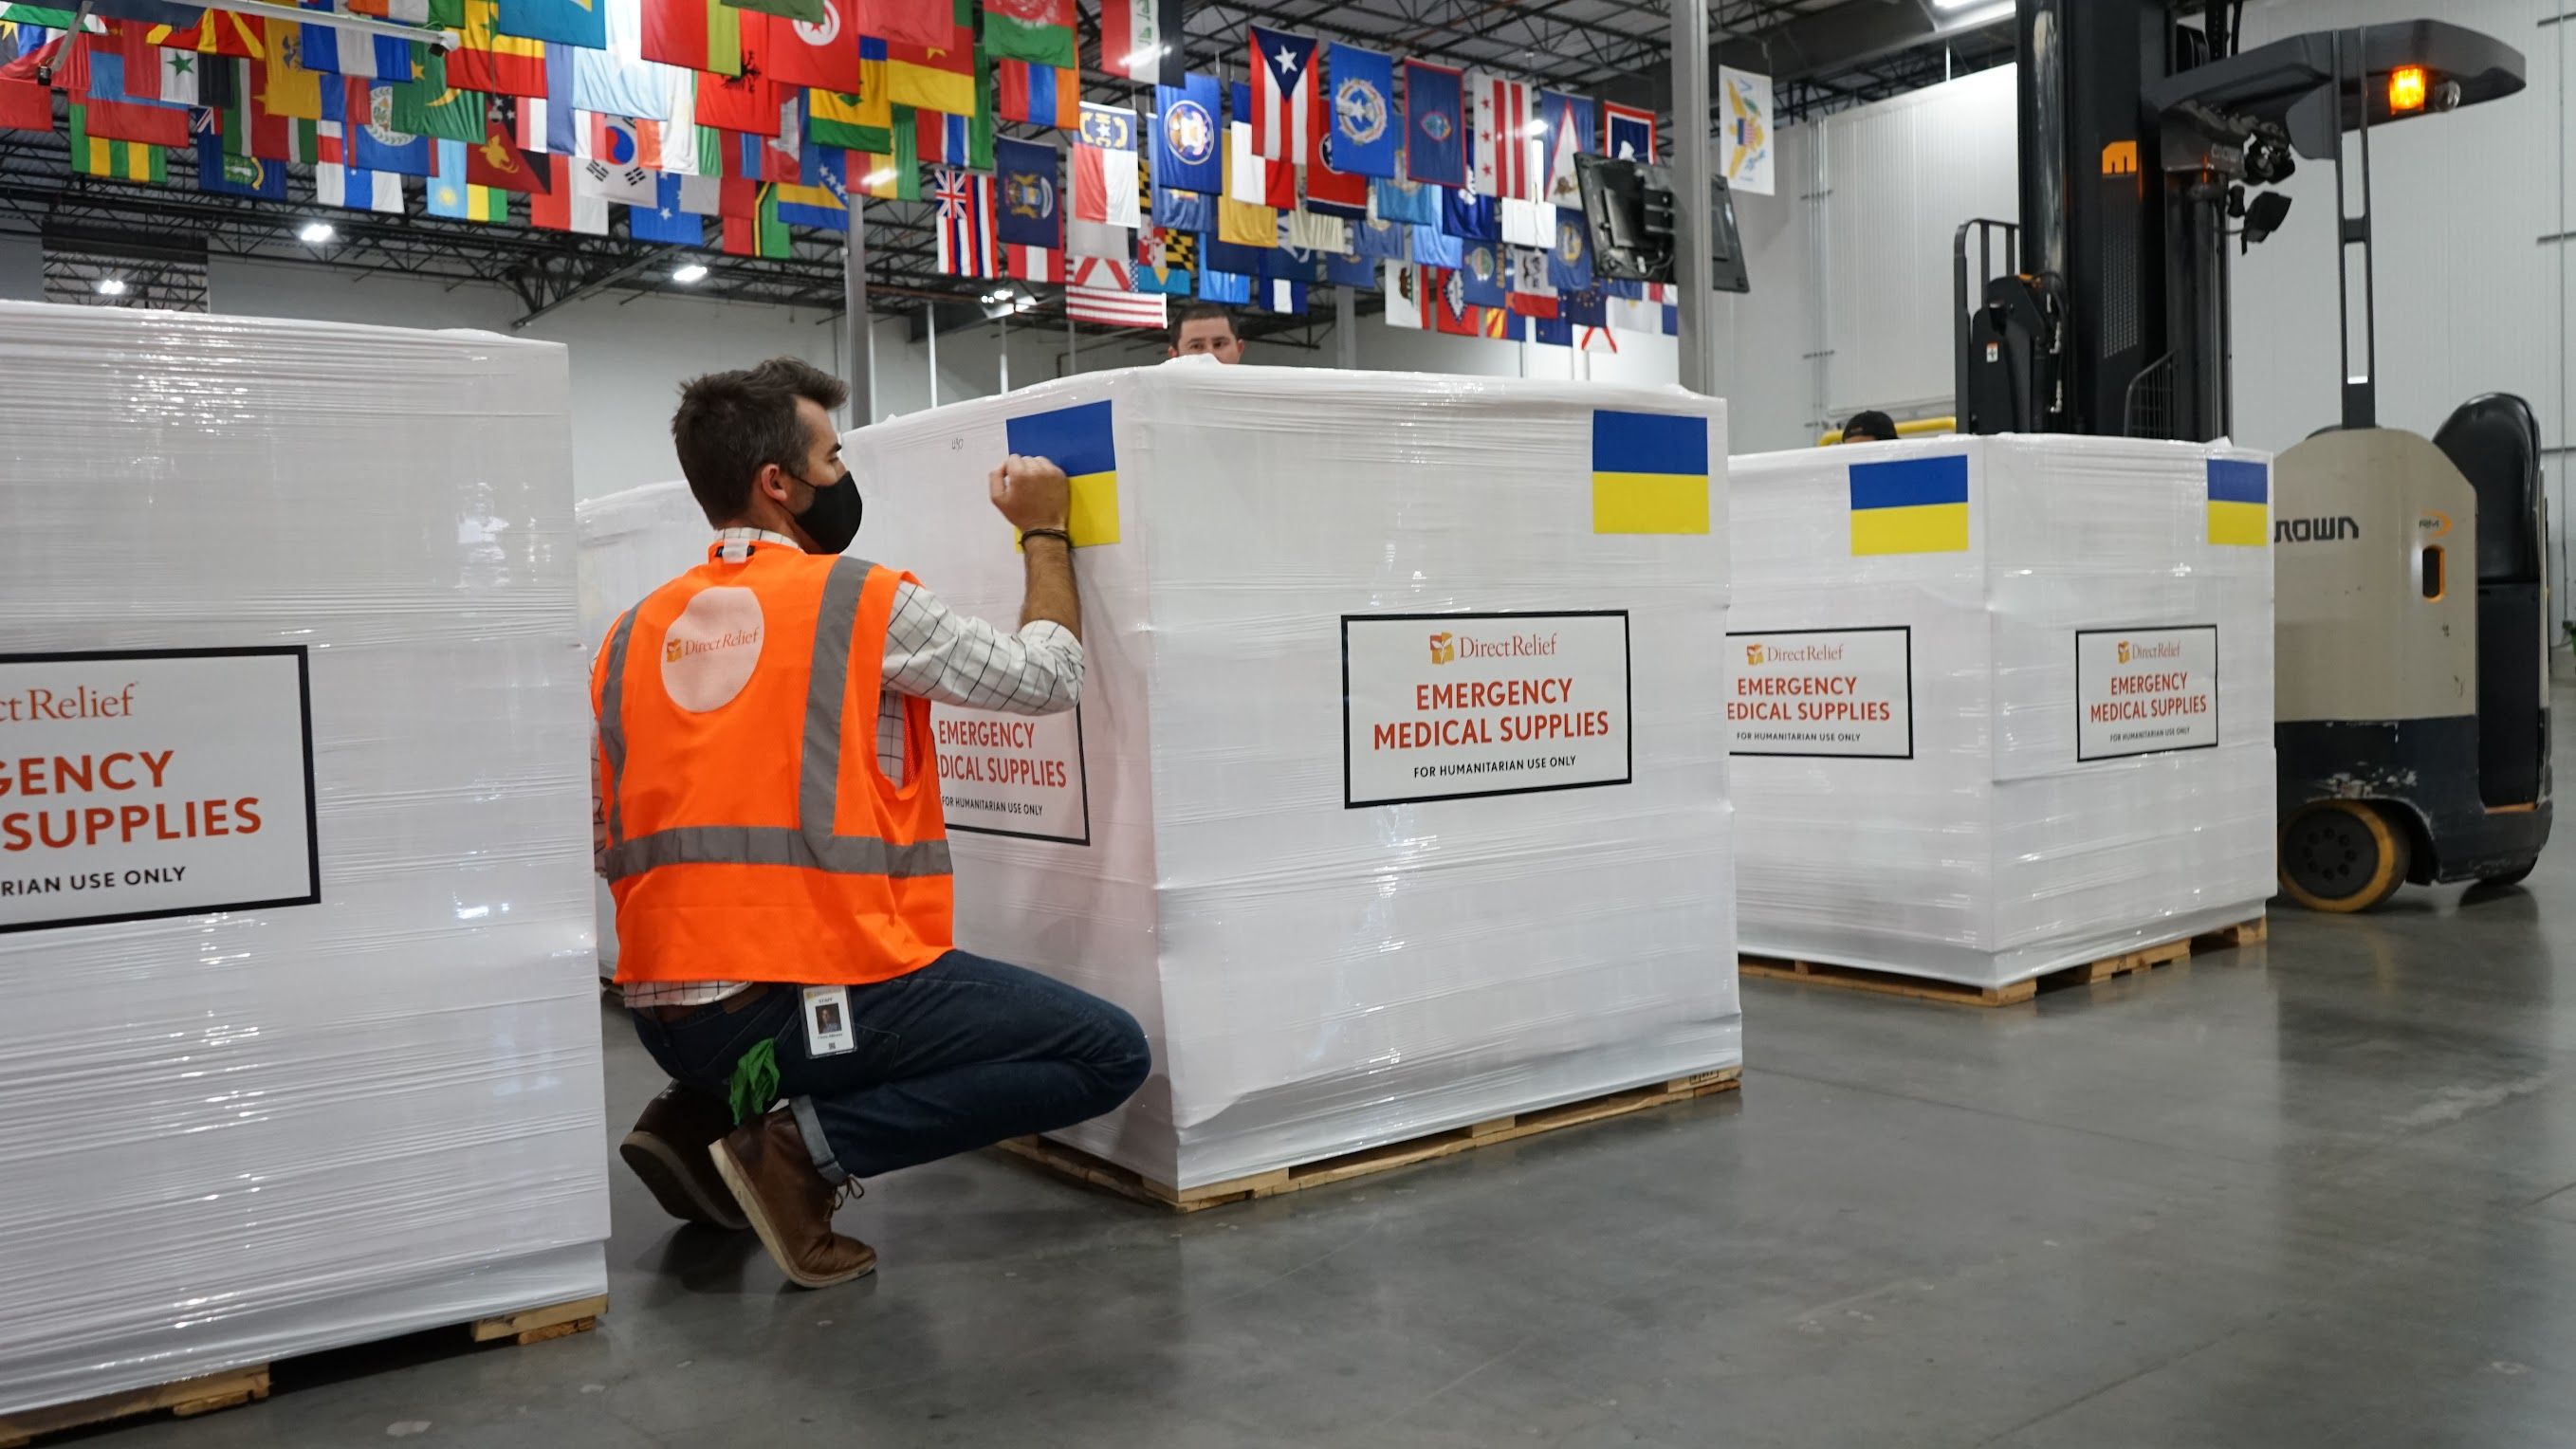 A person in an orange vest next to containers marked Emergency Medical Supplies